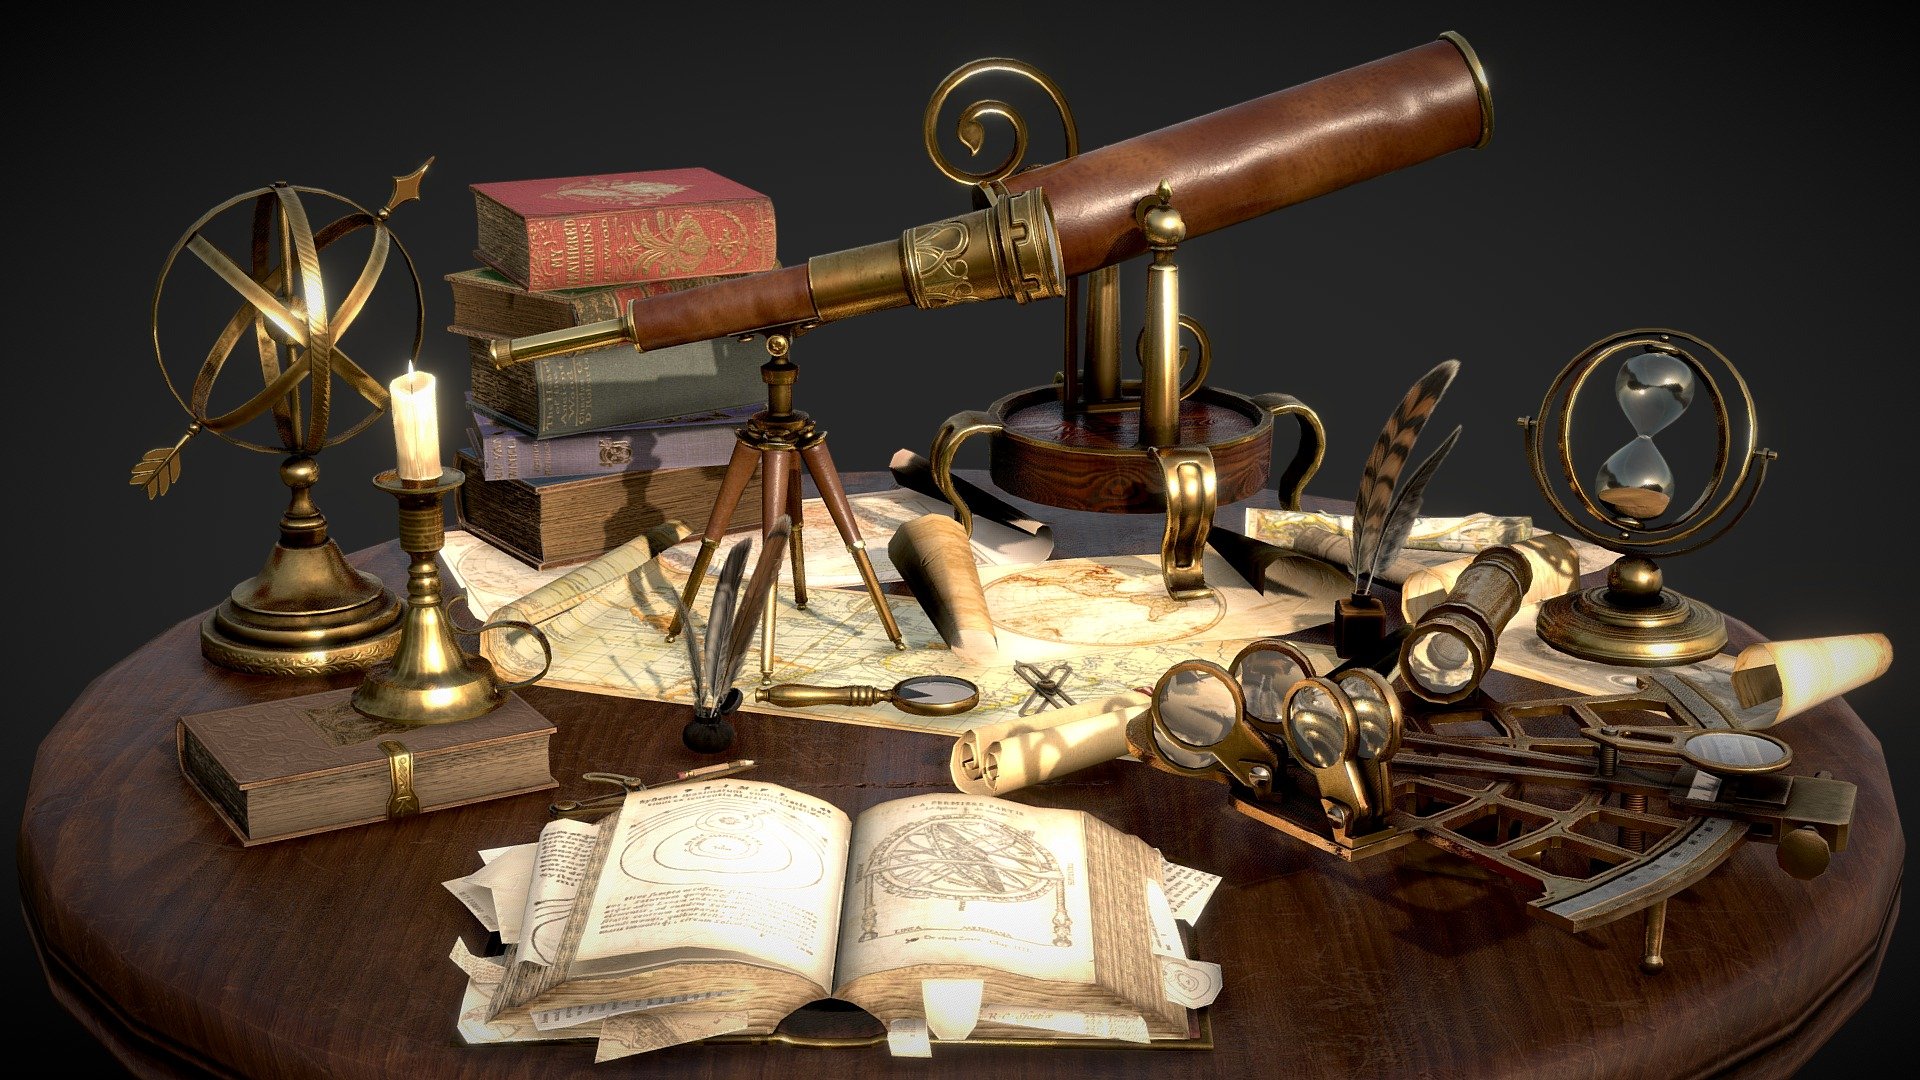 Astronomical Vintage Props - low poly

Triangles: 31.6k
Vertices: 17k

26 low poly models:




7 Books

2 Telescopes

2 Navigation Dividers

2 Roll Parchments / Scrolls

5 Maps

2 Pen Inkwels

Sextant Telescope

Magnifying Glass

Hourglass

Candlestick

Armillary Sphere

Round Table

Textures (2K and 4K and UE textures) and separate models in additional file.

Commercial use*

My models cannot be included in an asset pack or sold at any sort of asset/resource marketplace.* - Astronomical Vintage Props - low poly pack - Buy Royalty Free 3D model by Karolina Renkiewicz (@KarolinaRenkiewicz) 3d model